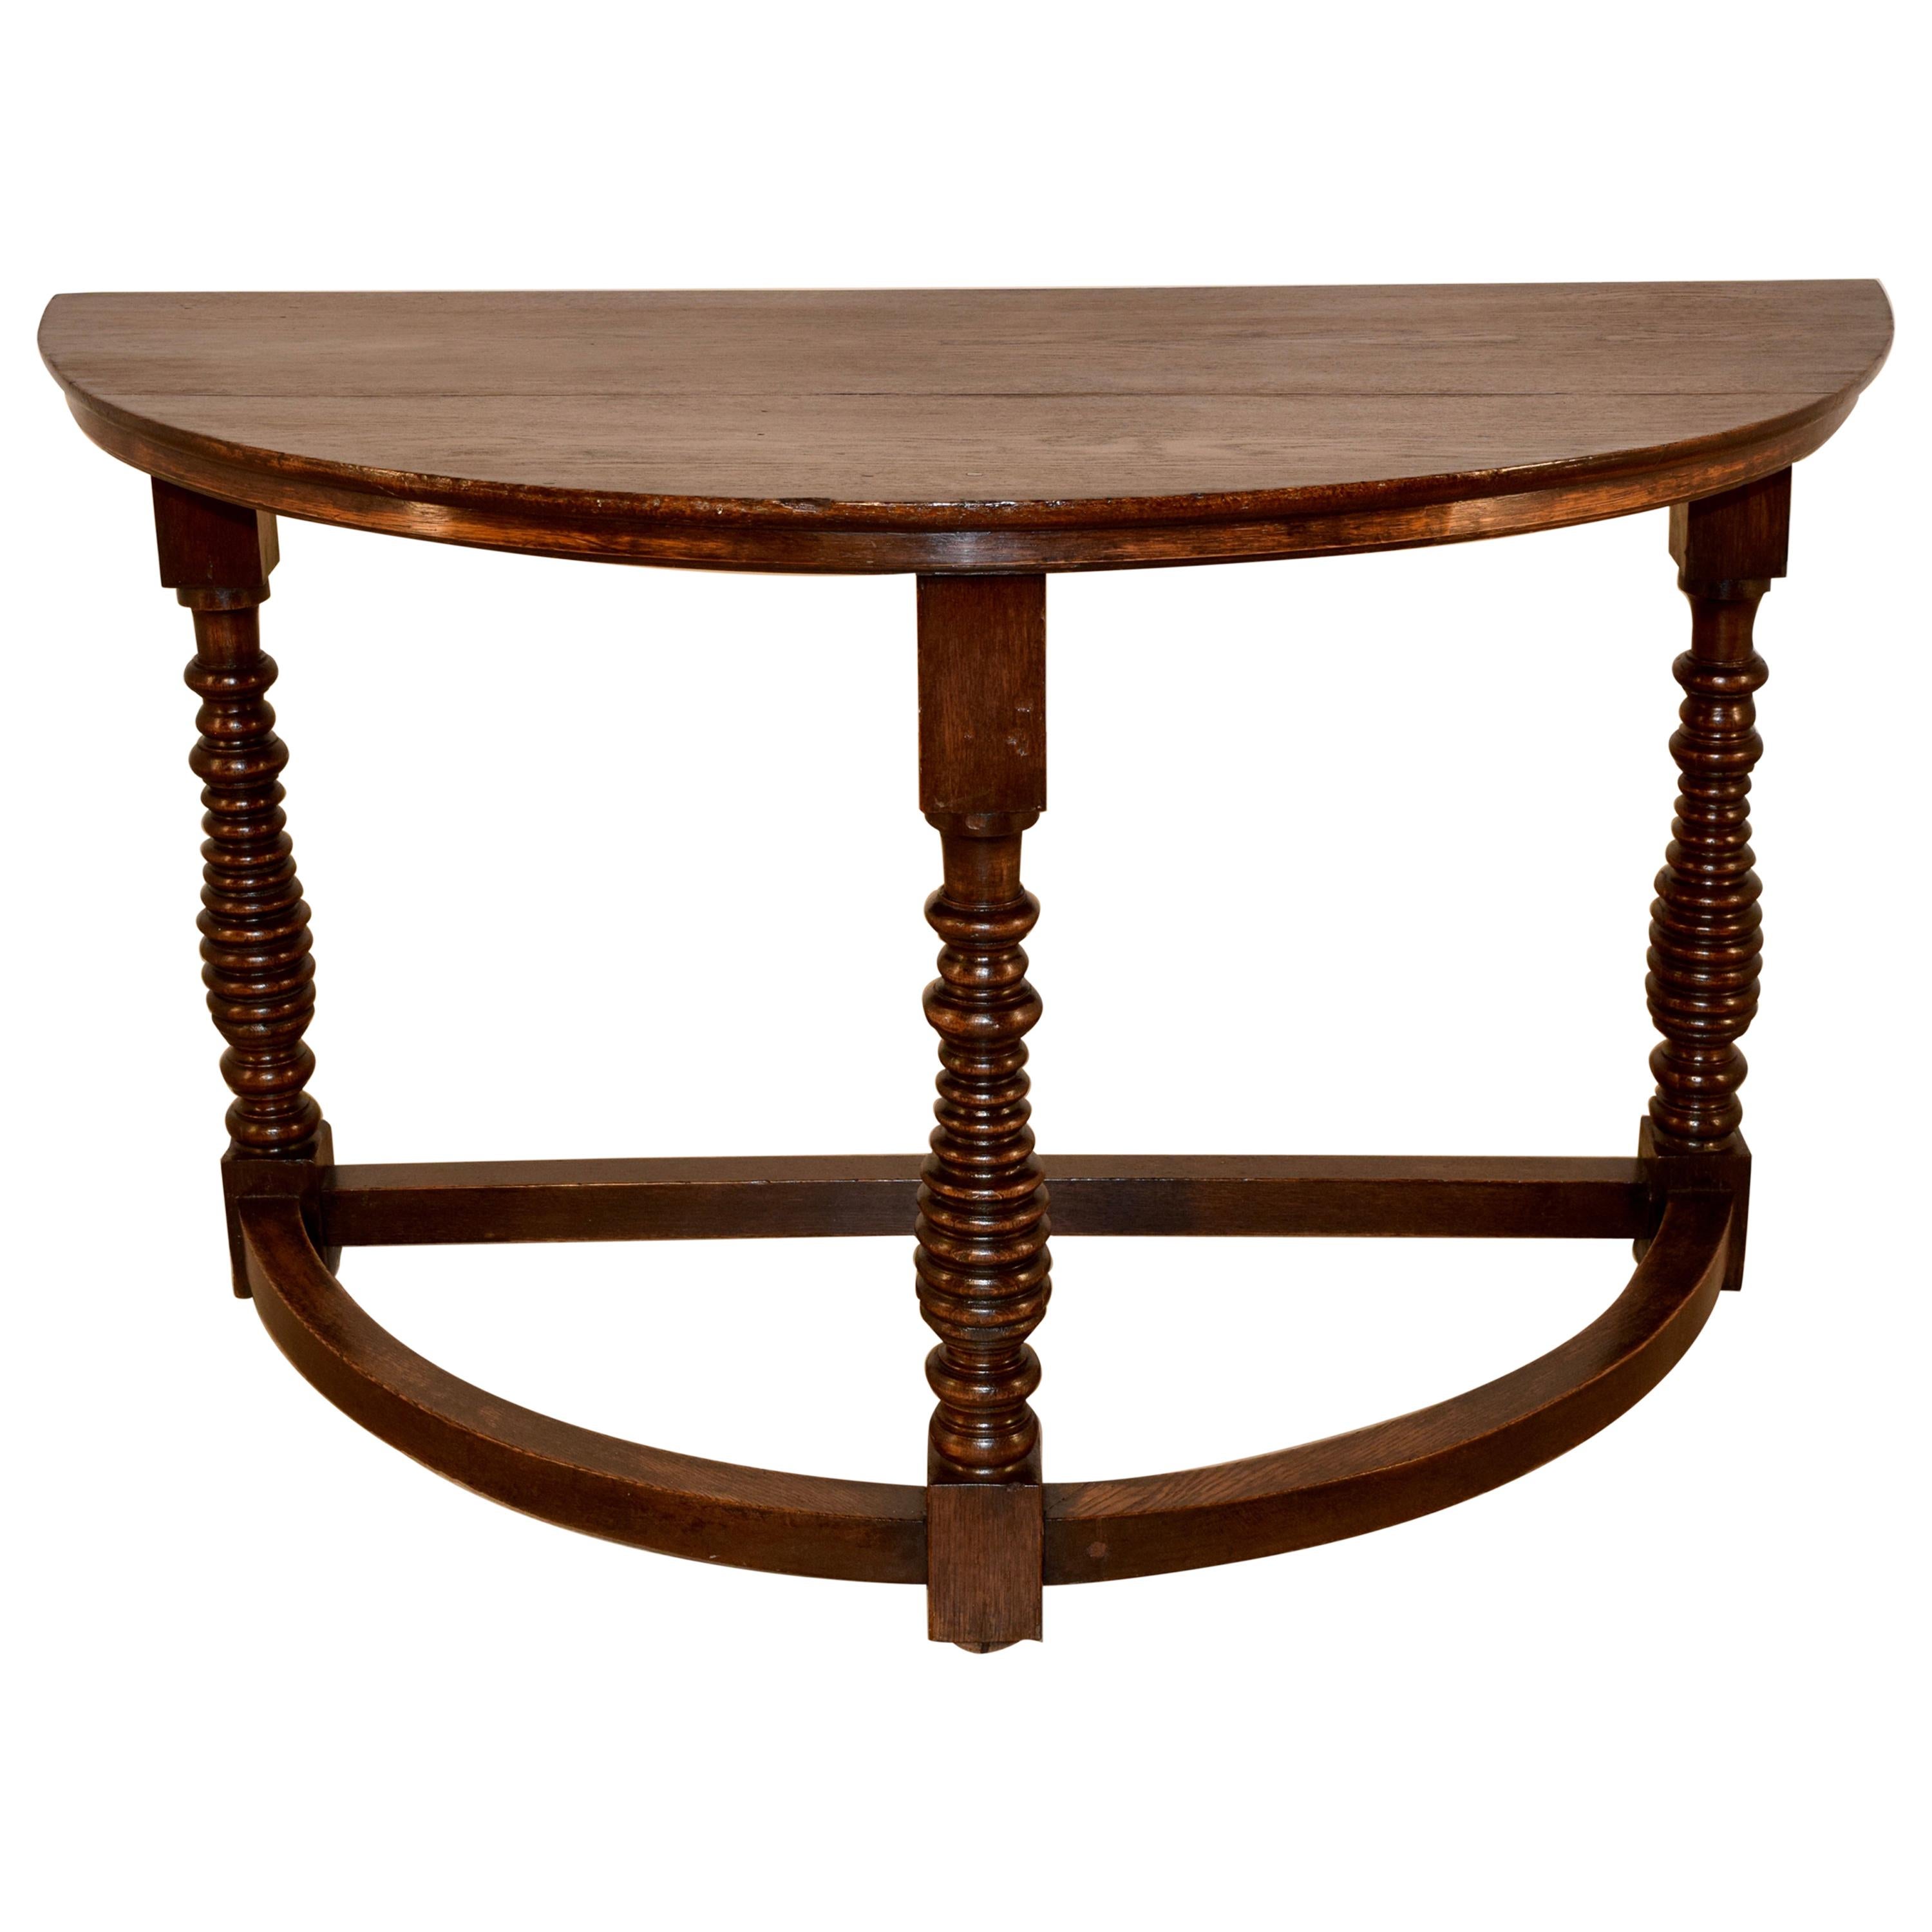 19th Century English Demilune Table For Sale